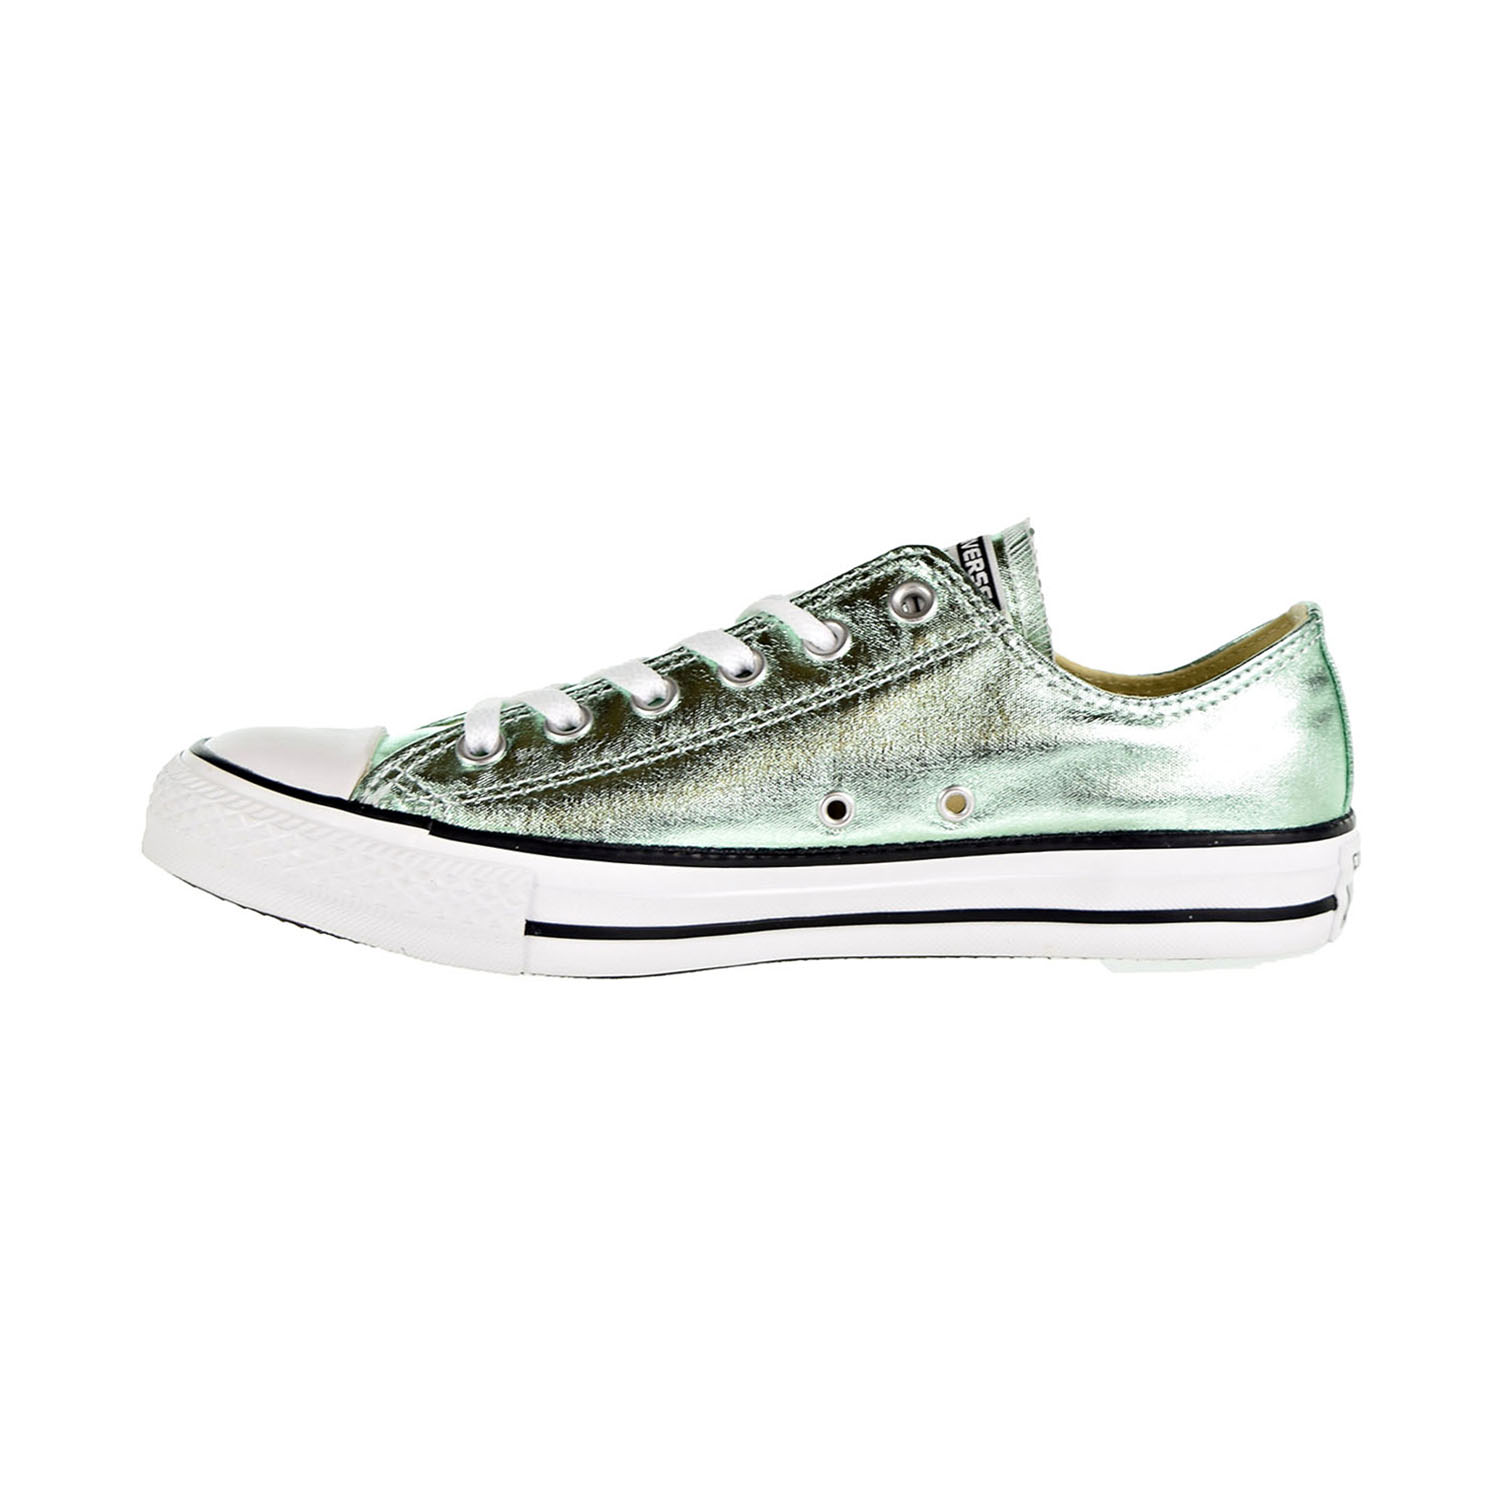 Converse Chuck Taylor All Star Ox Men's Shoes Jade-Black-White 155562f - image 5 of 6